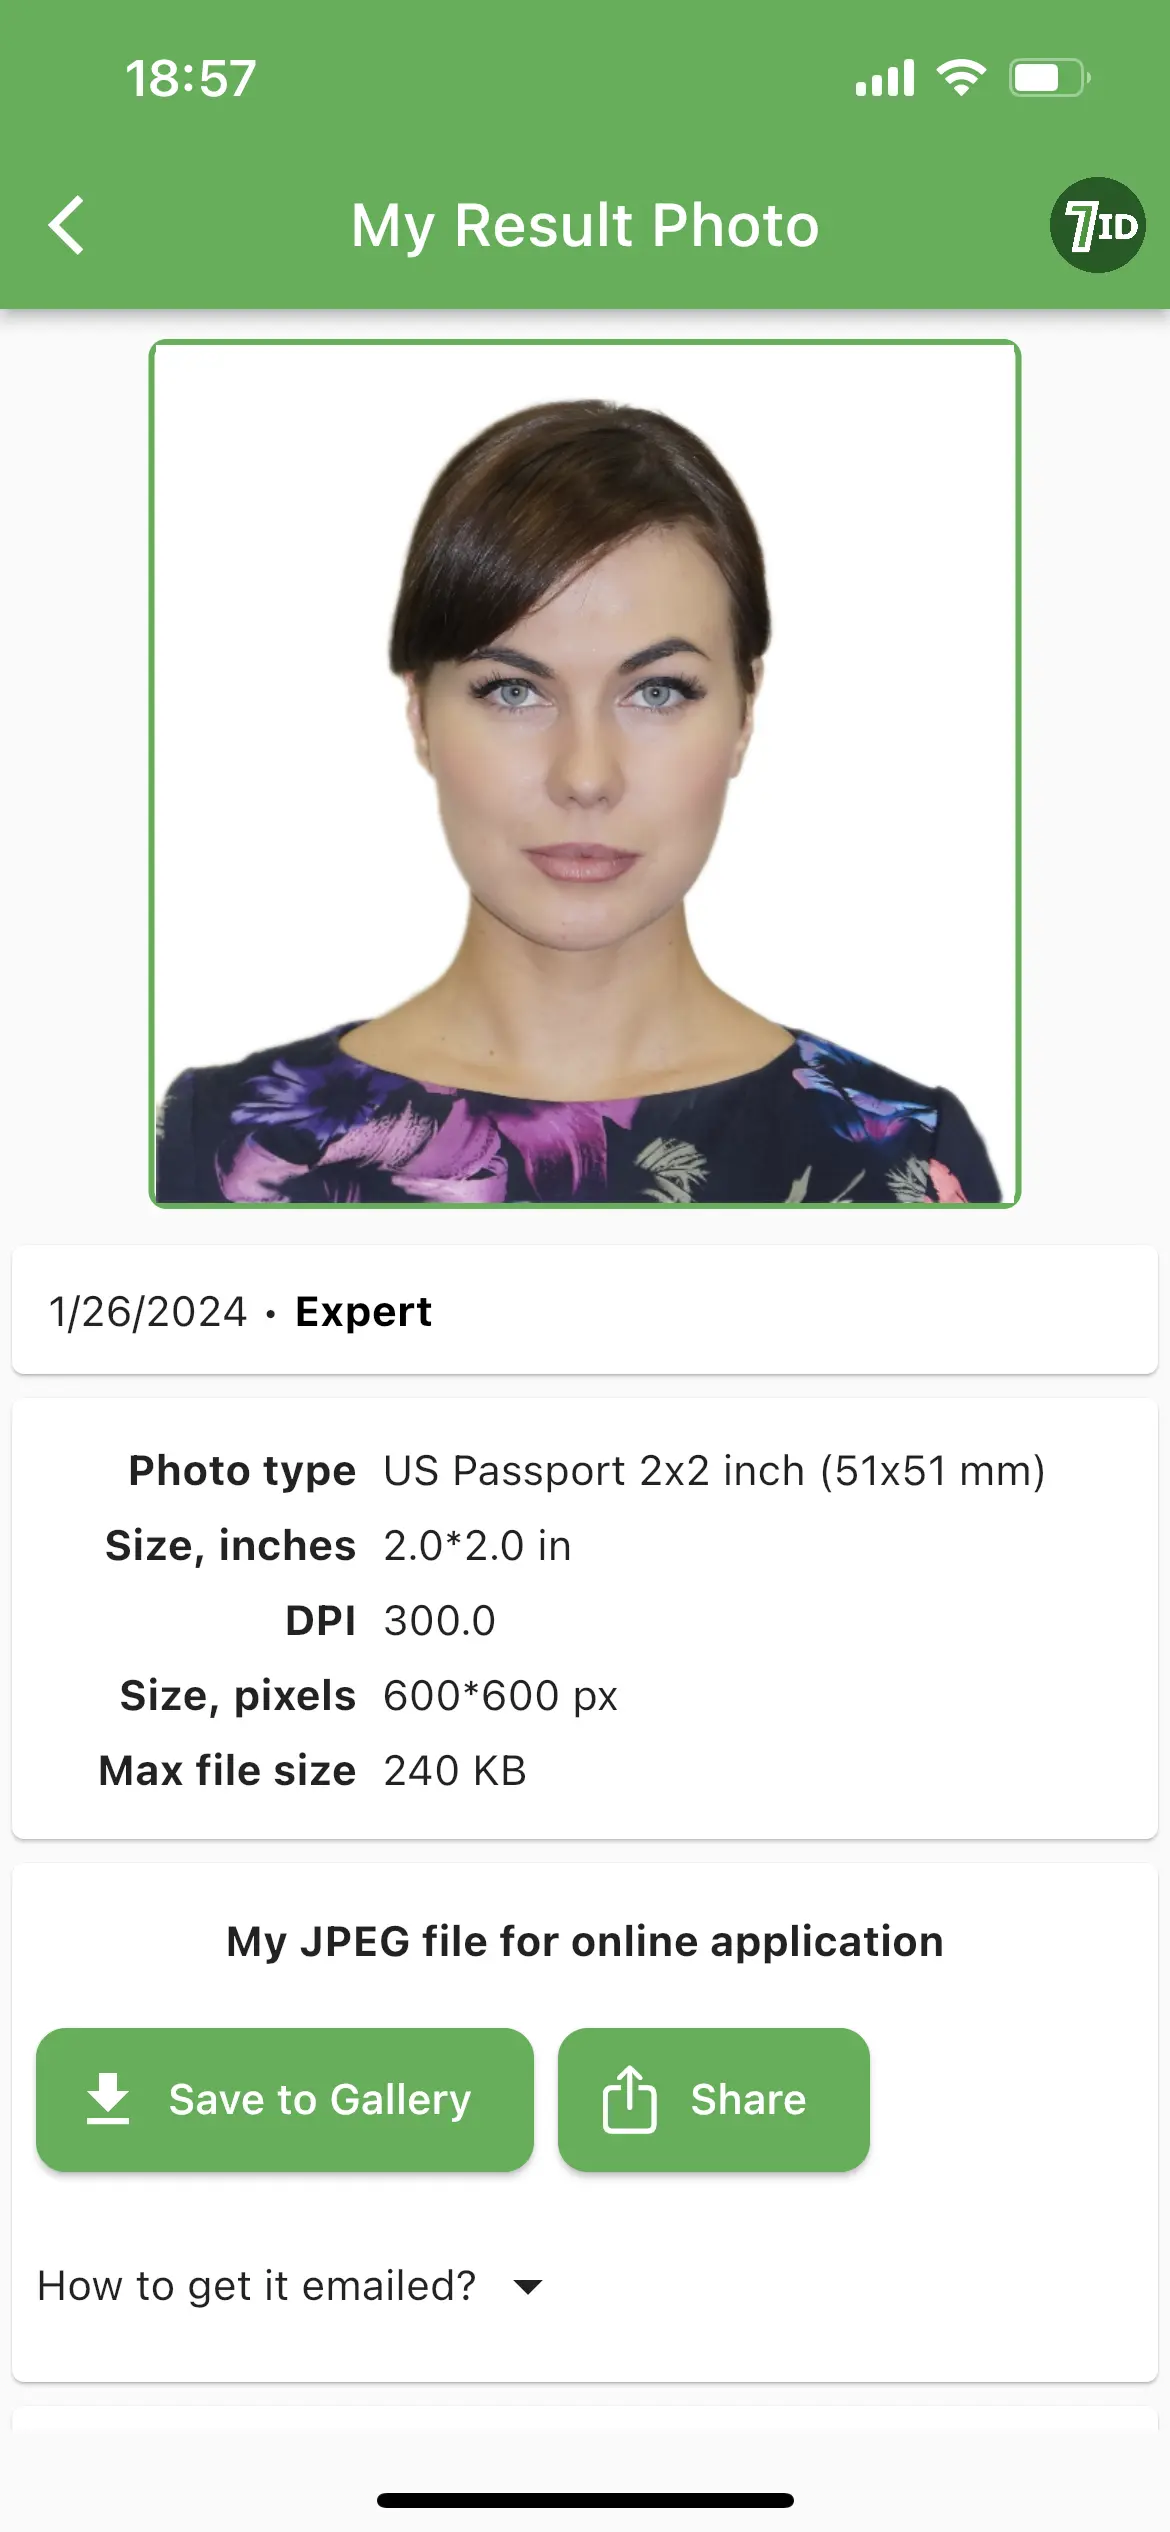 7ID App: Get a USA Passport Photo in seconds